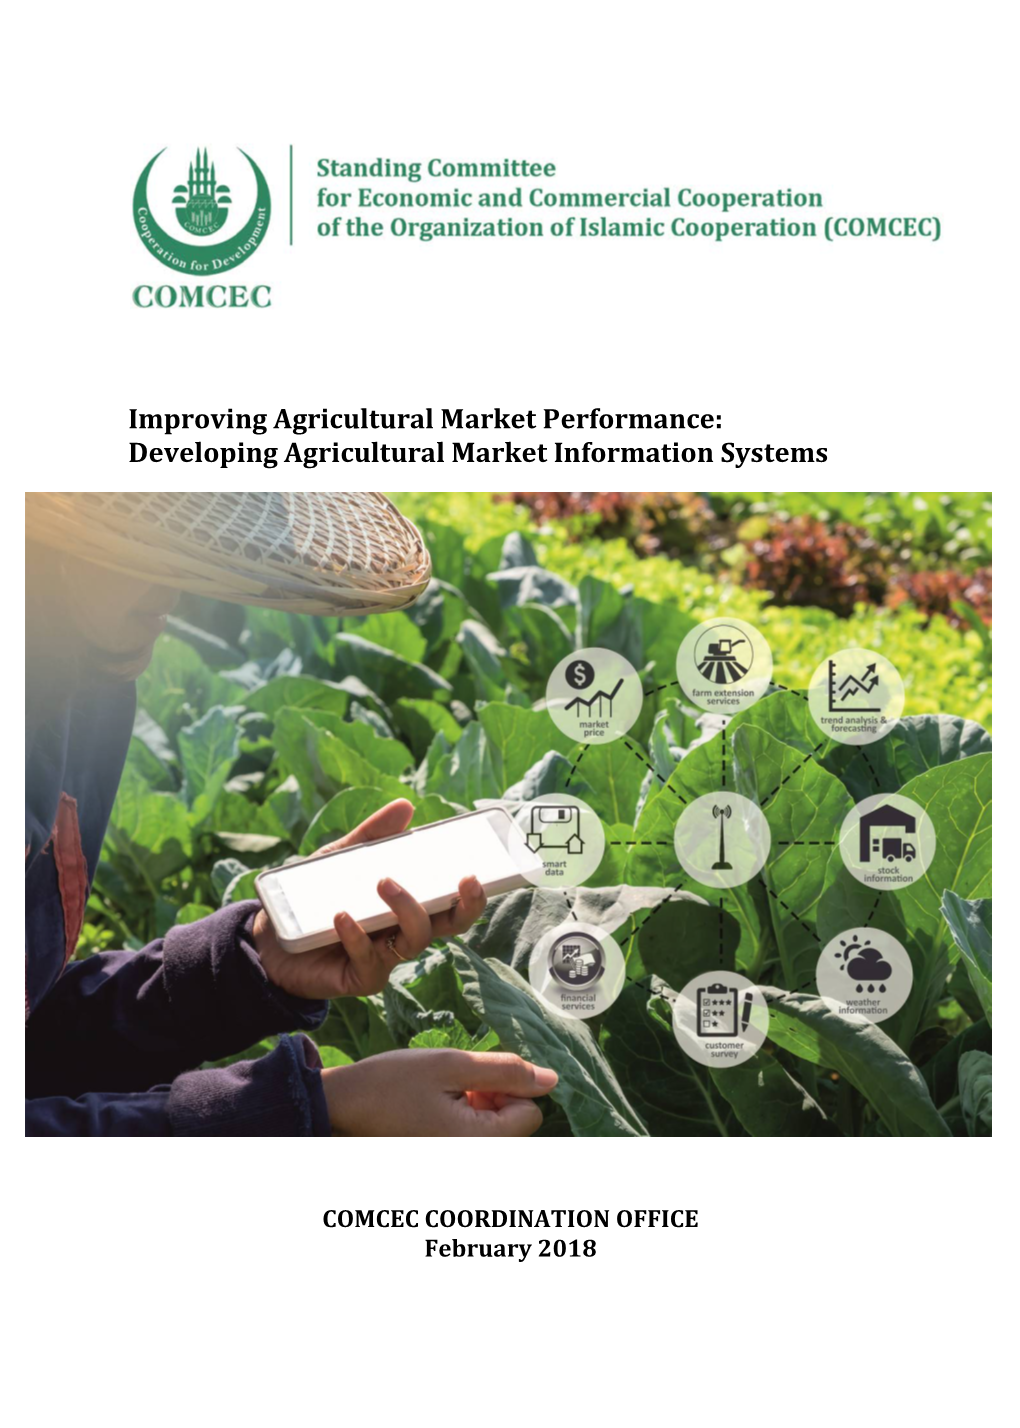 Developing Agricultural Market Information Systems